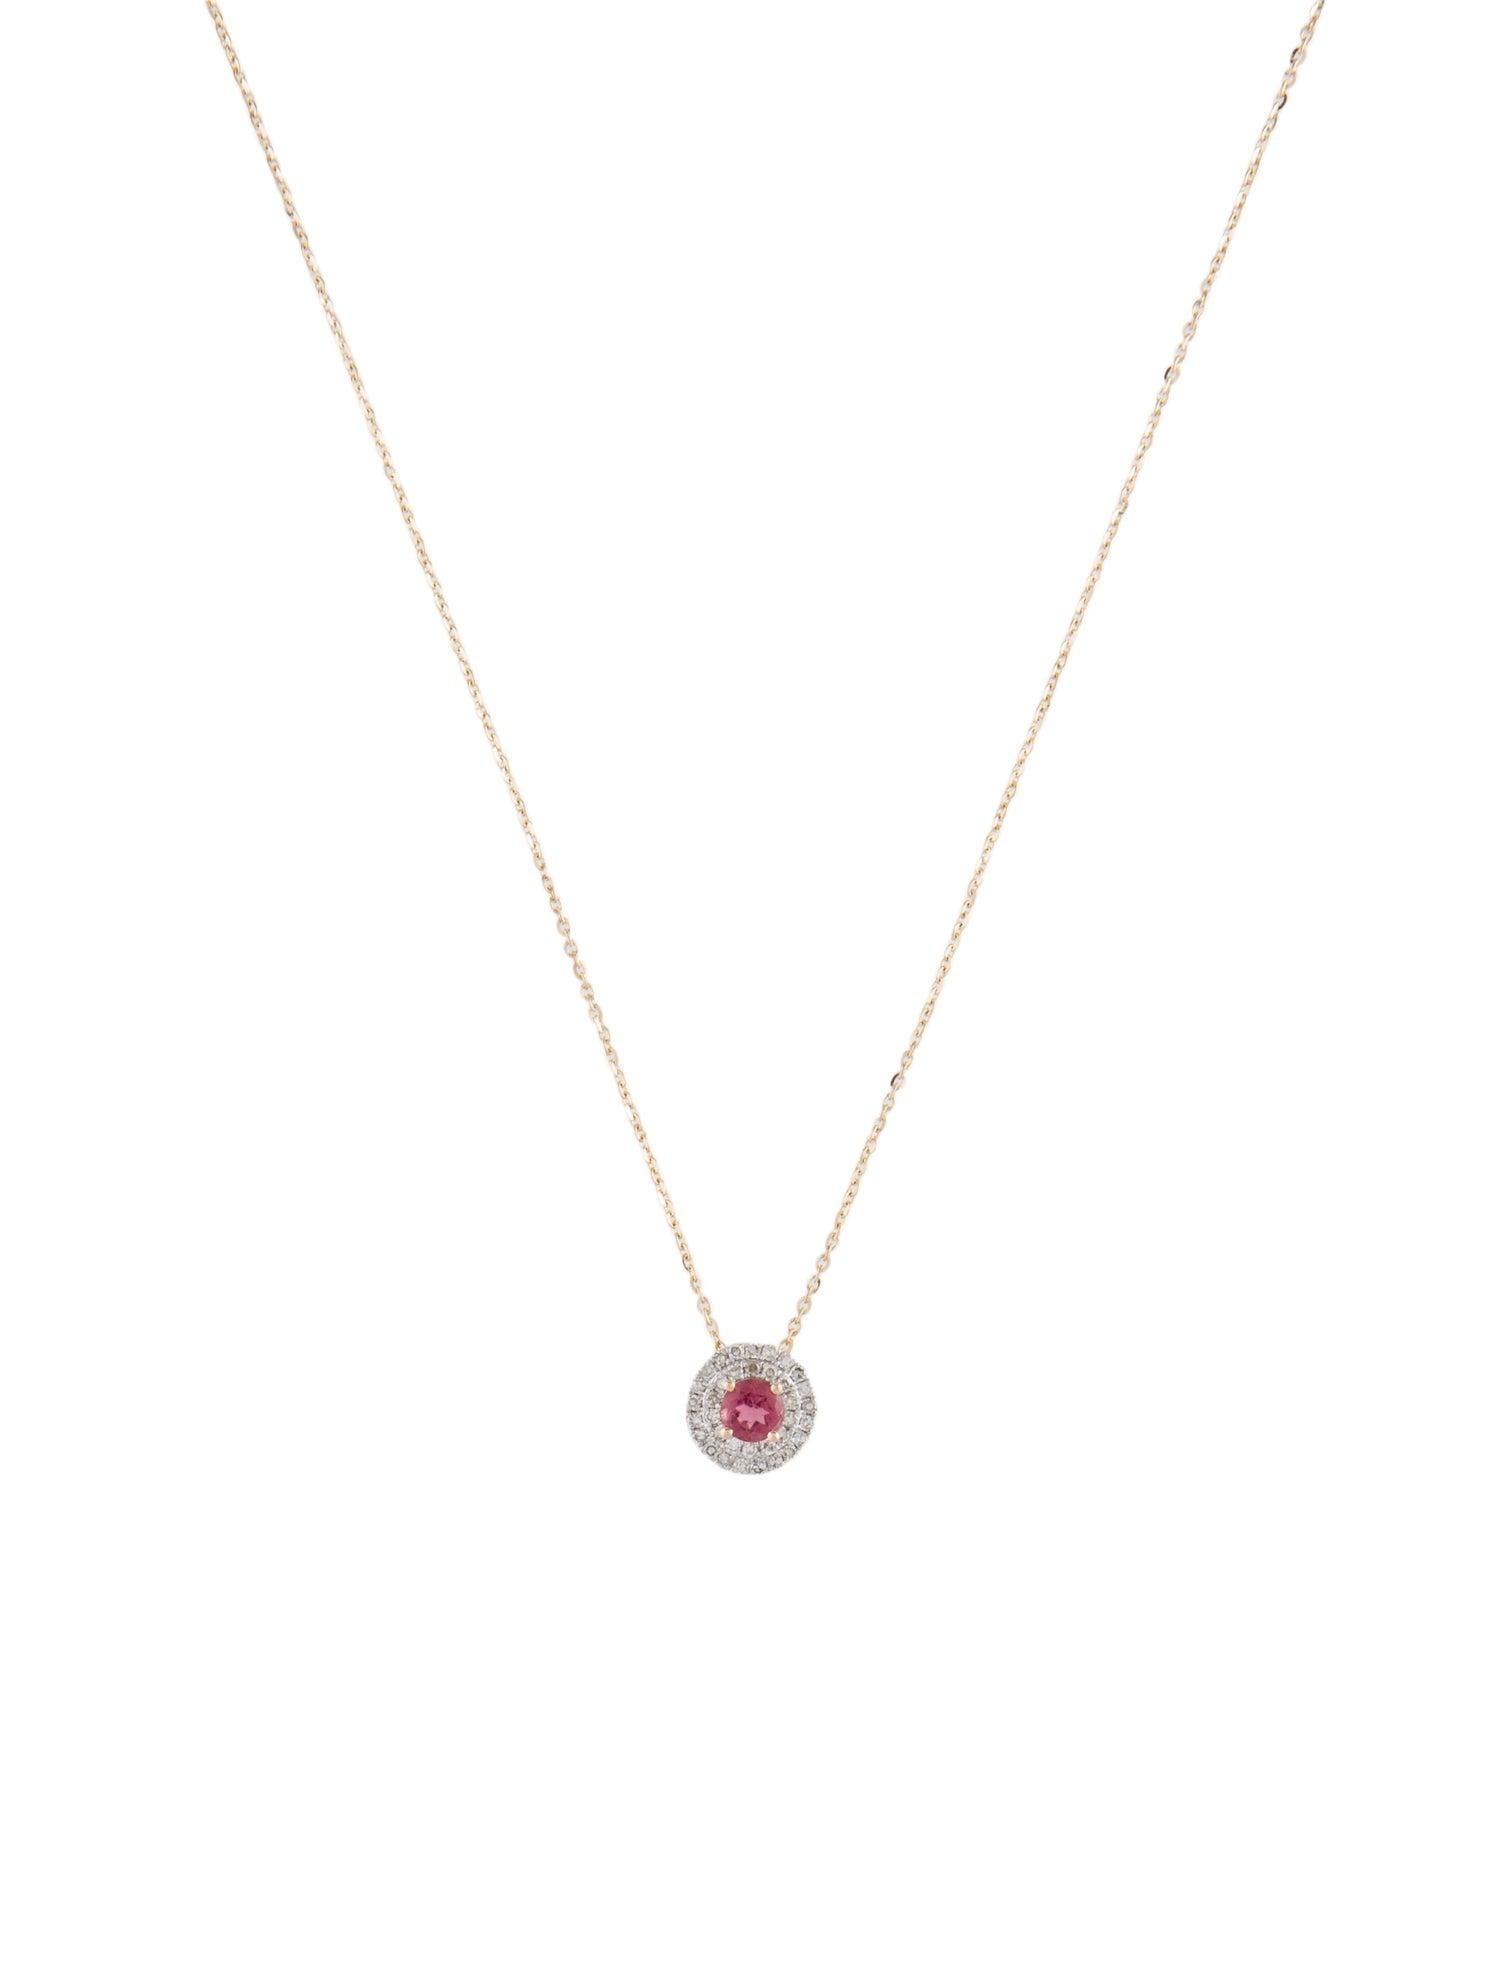 Immerse yourself in the mesmerizing allure of our Rainbow Gemstone Radiance Collection, where the vivid palette of nature's colors finds expression in the exquisite Pink Tourmaline and Diamond Pendant. Crafted with precision and passion by